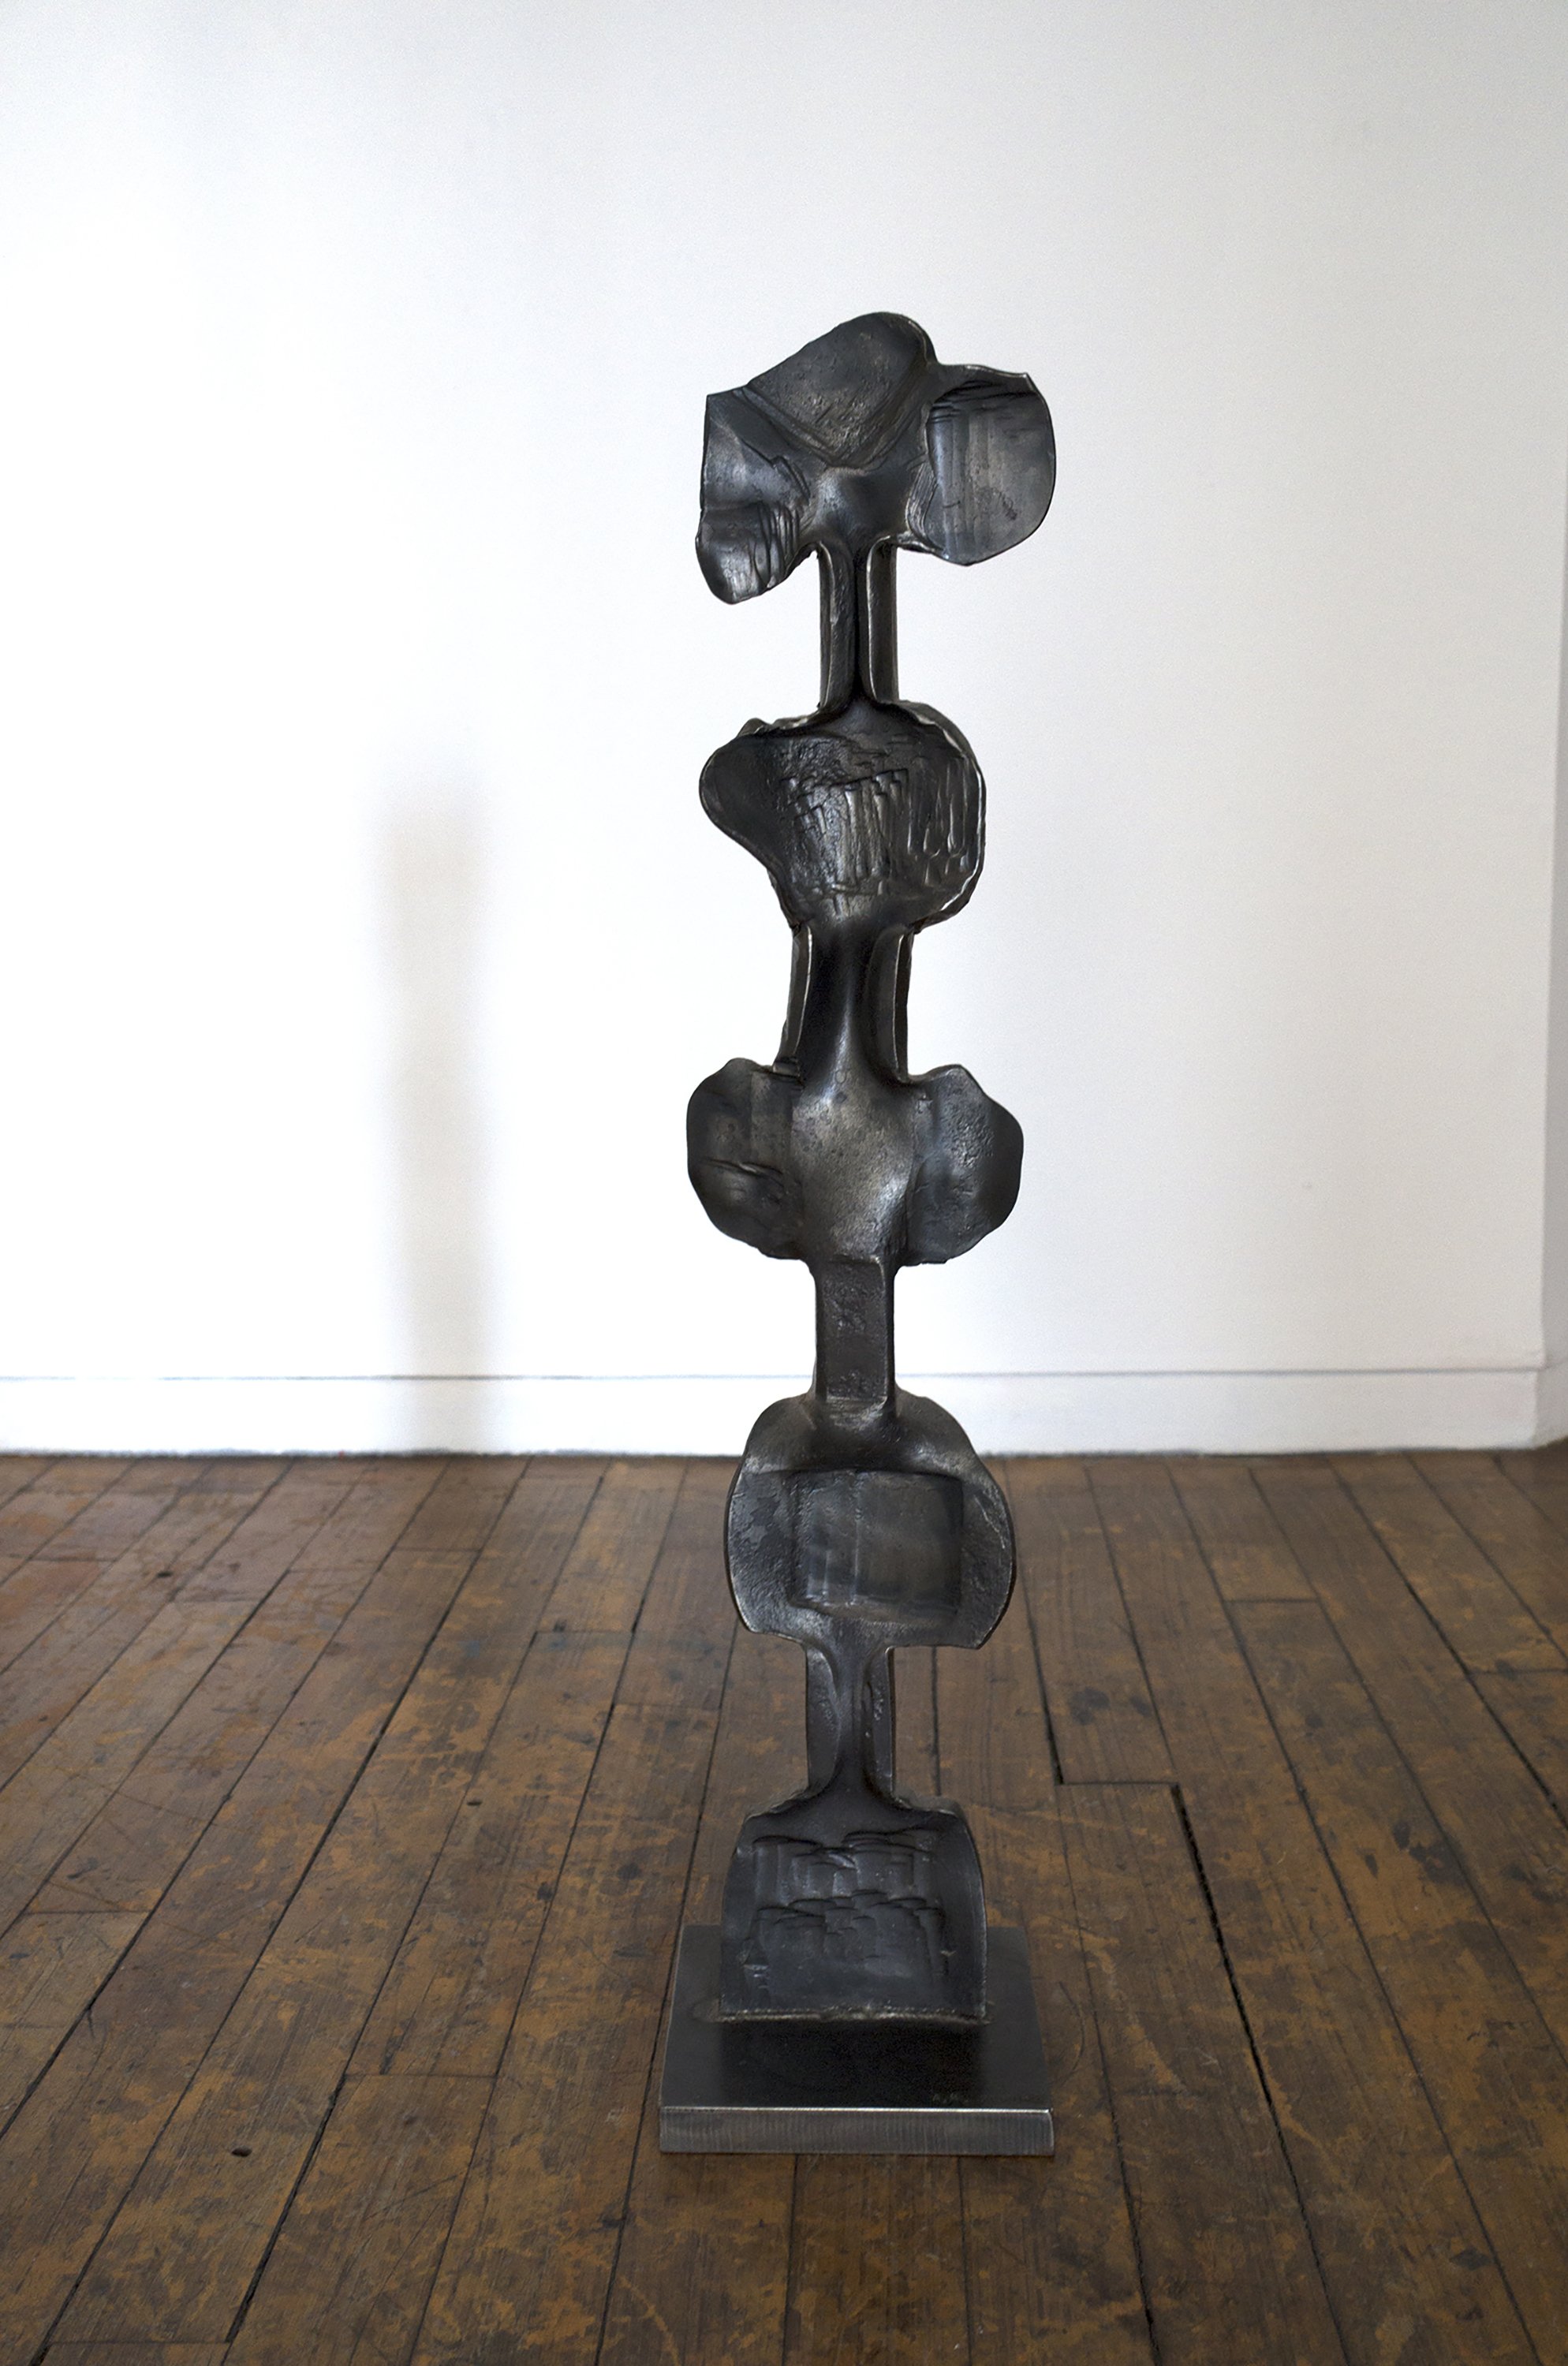 Totem (or Voice), 2004